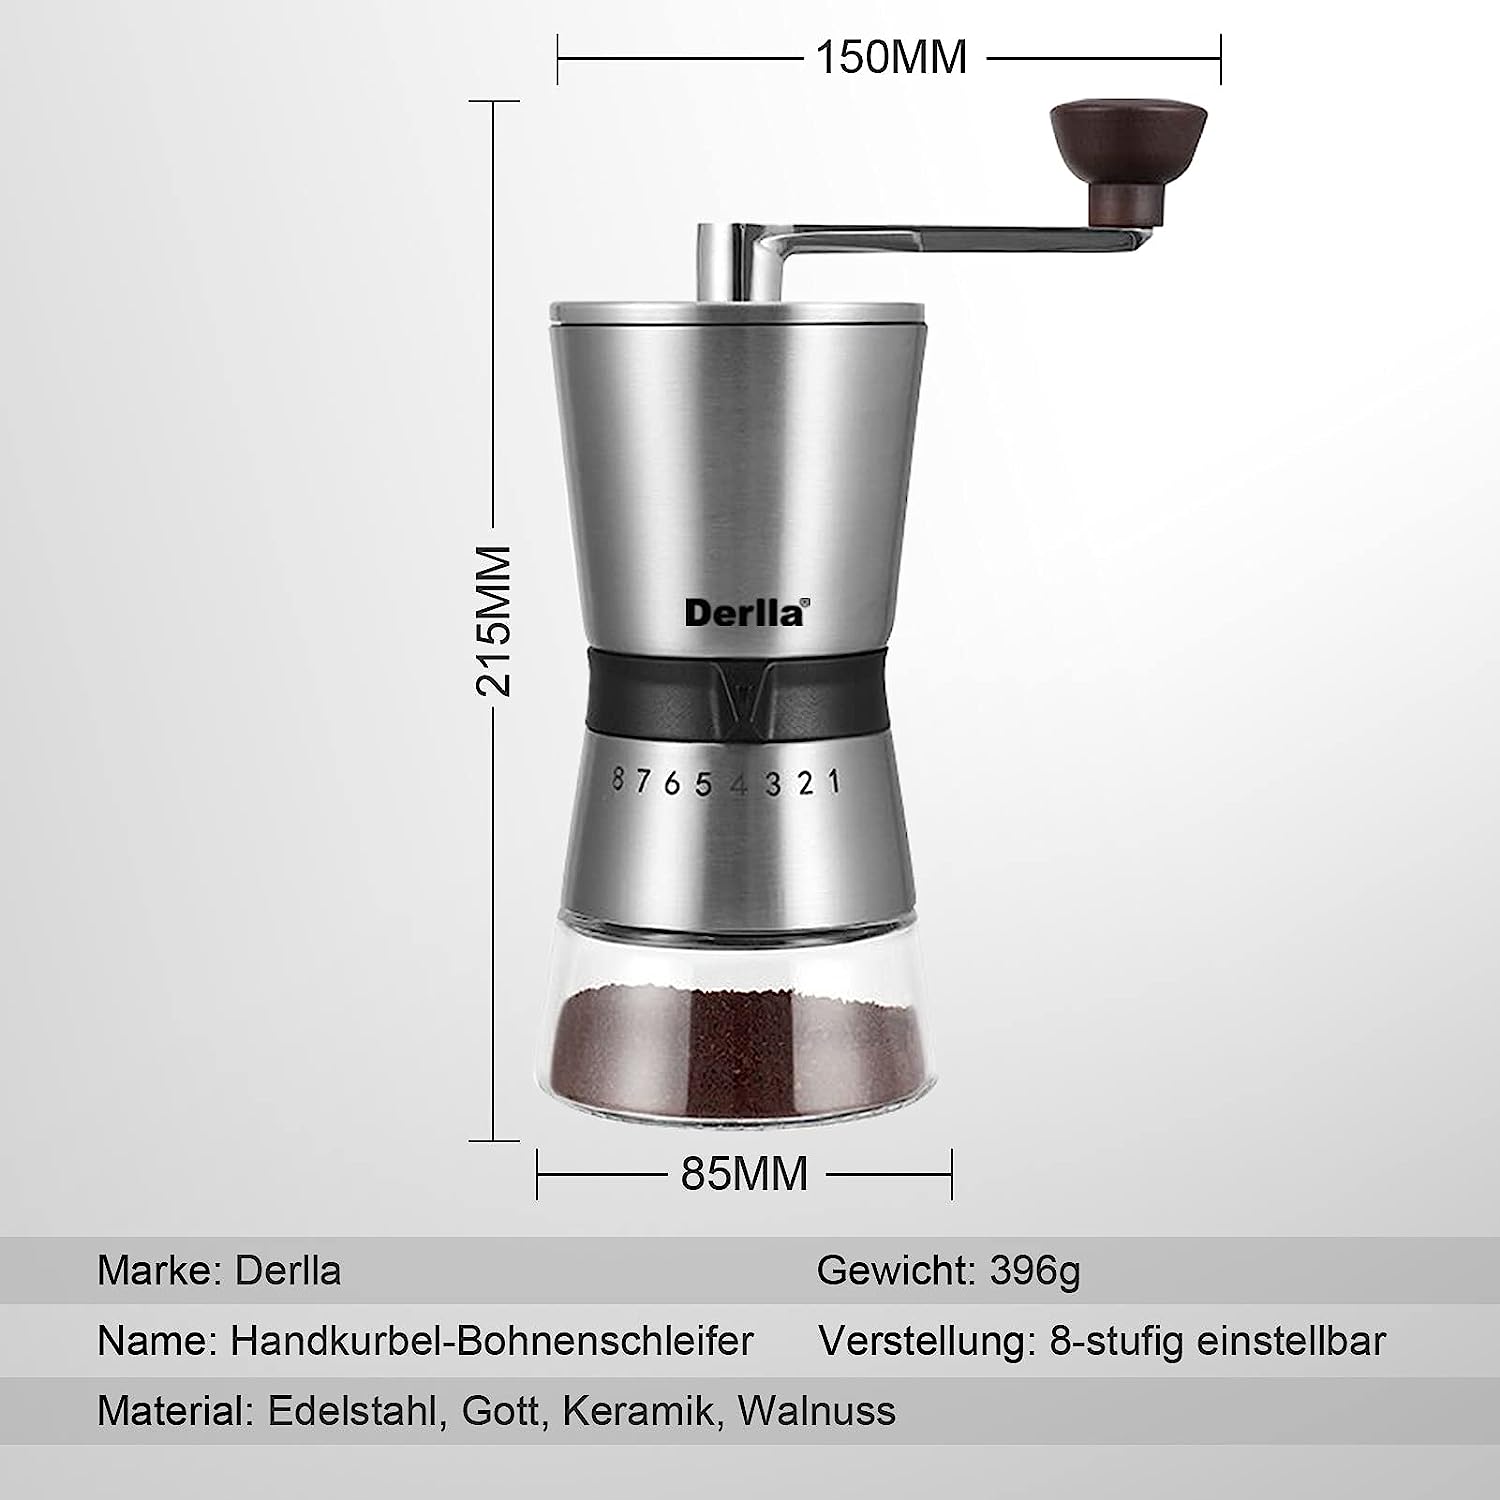 Derlla Coffee Grinder, Stainless Steel Coffee Grinder, Manual Coffee Grinder, Espresso Grinder, Adjustable Grinding Level - Hand Mill Made of Stainless Steel and Glass (Silver)